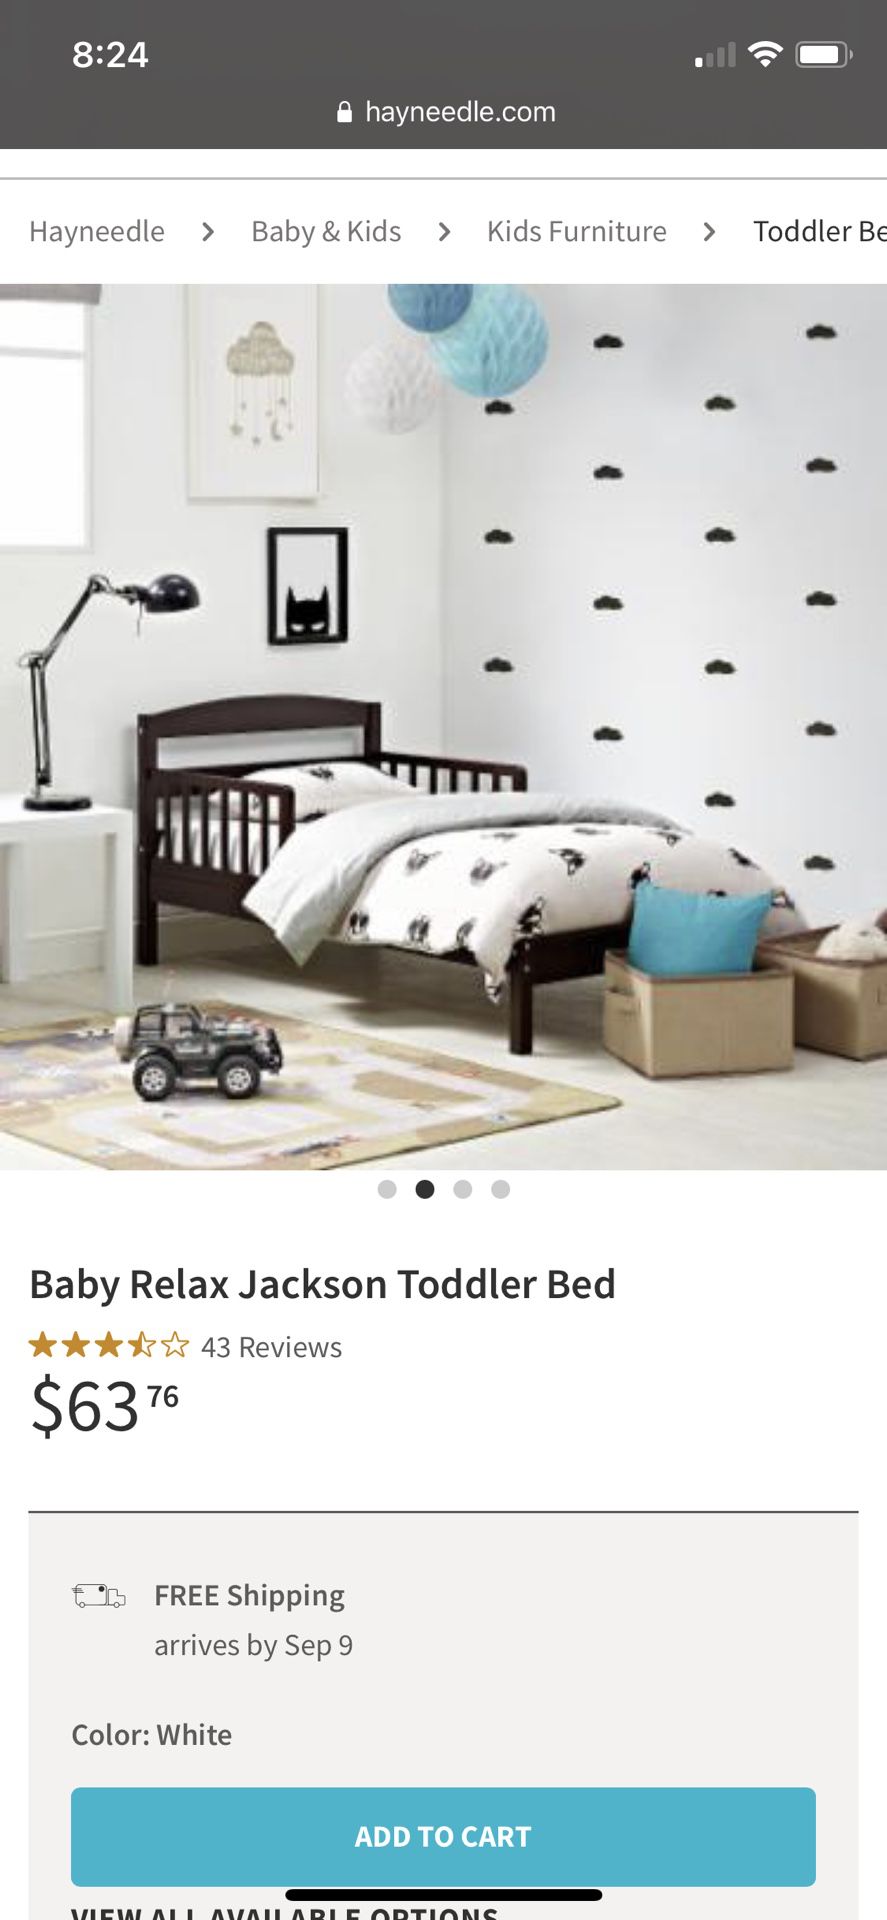 Baby Relax Toddler Bed